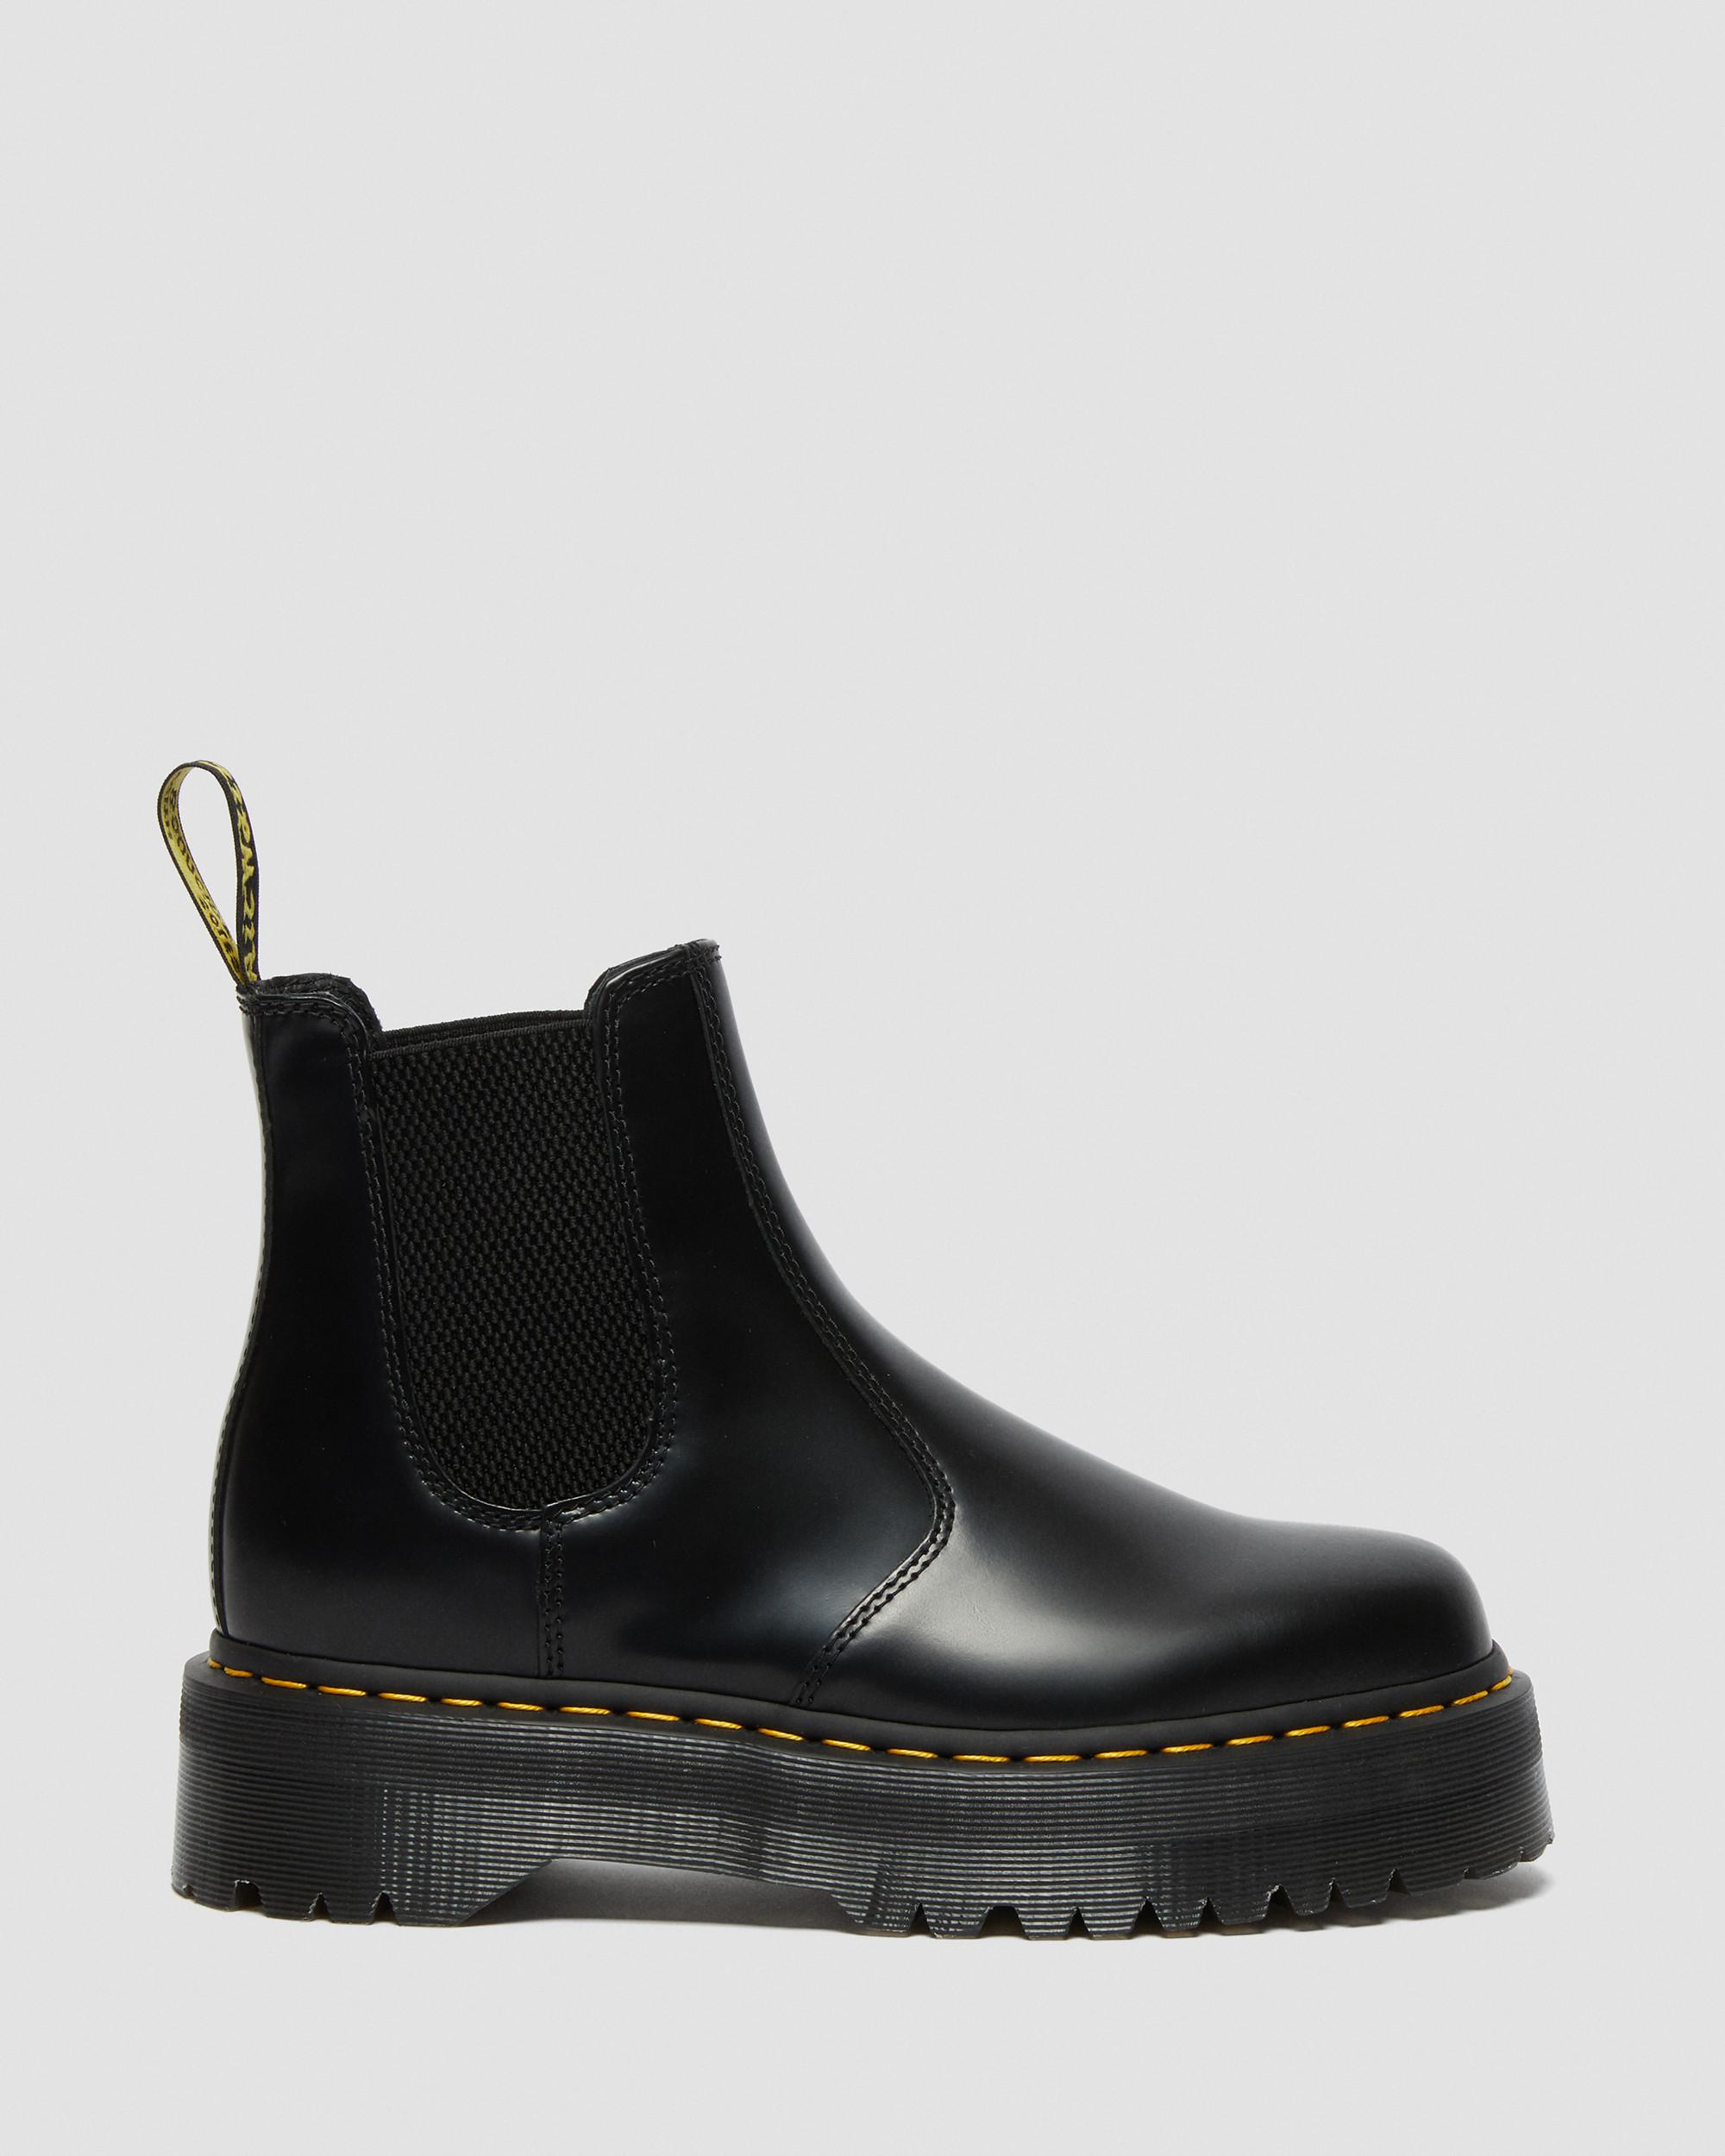 2976 Quad Smooth Leather Platform Chelsea Boots2976 Quad Smooth Leather Platform Chelsea Boots Dr. Martens